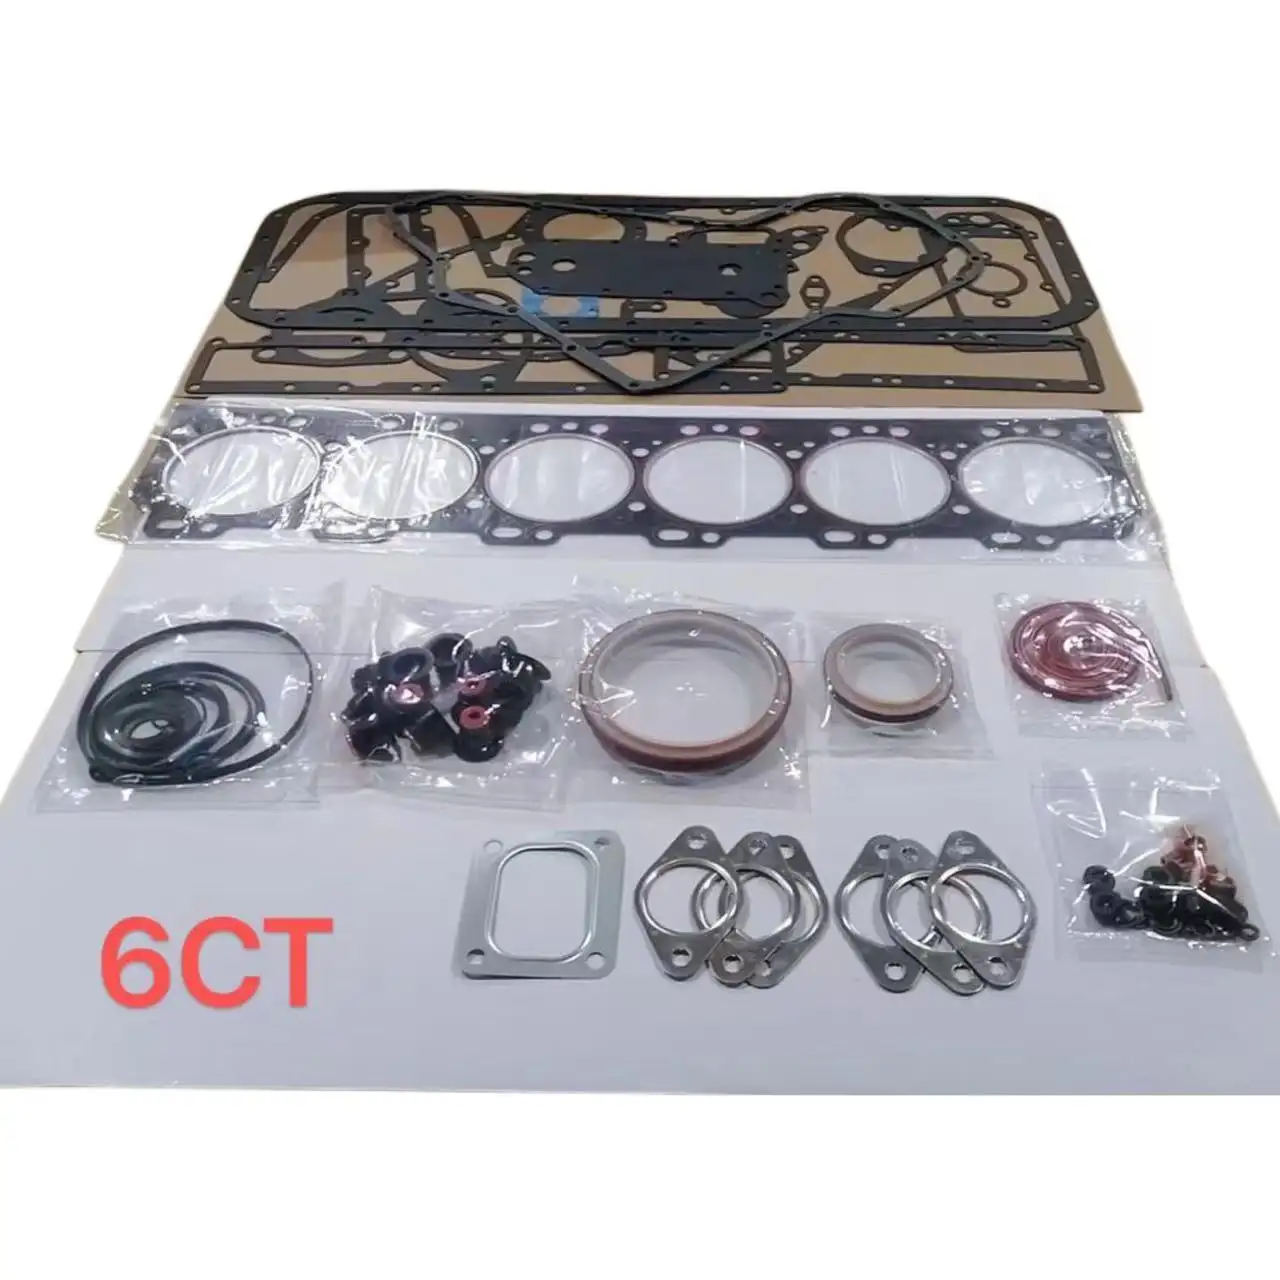 Engine Spare Parts Piston 6CT 3096680 4089865 Liner Kits 5290937 Overhaul Kit Full Gasket For Cummins Engine Parts